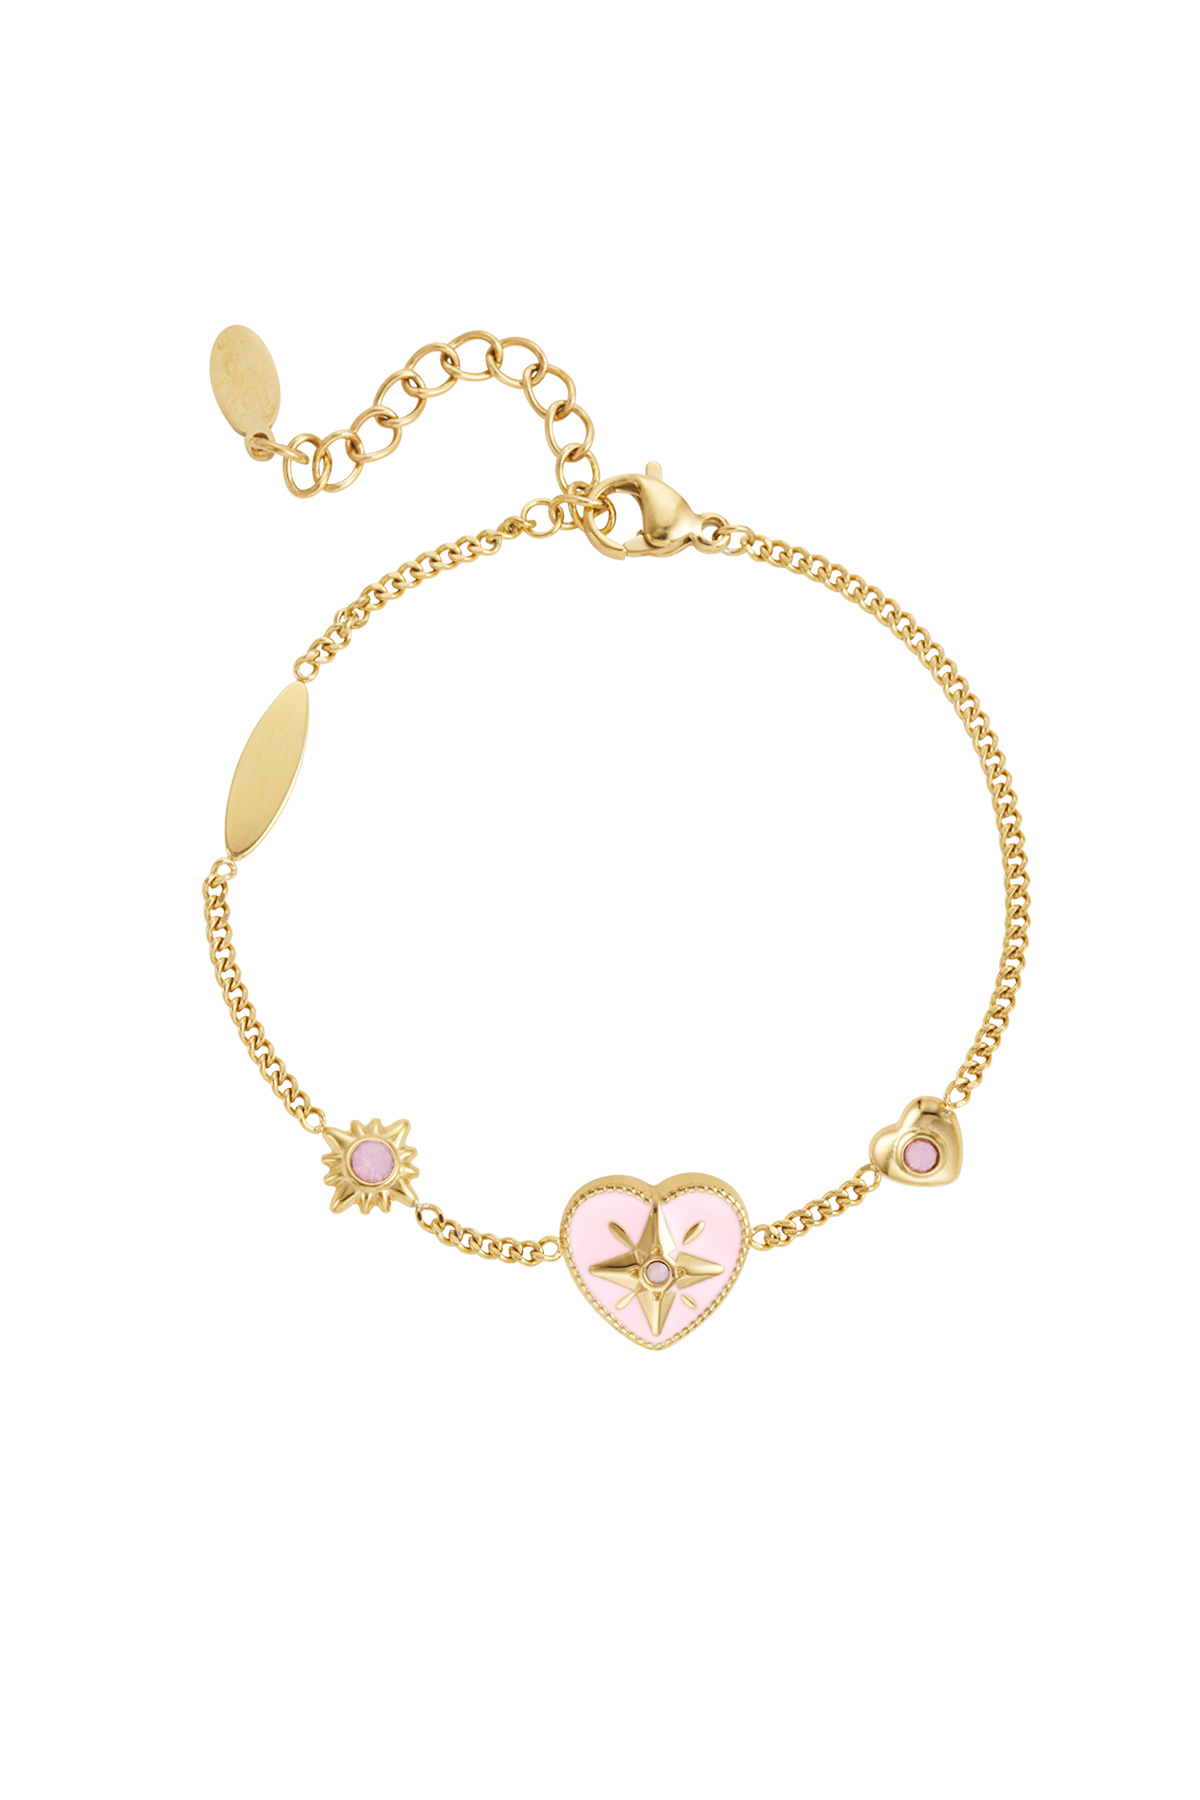 Armband mit farbigen Charms – Gold/Rosa h5 